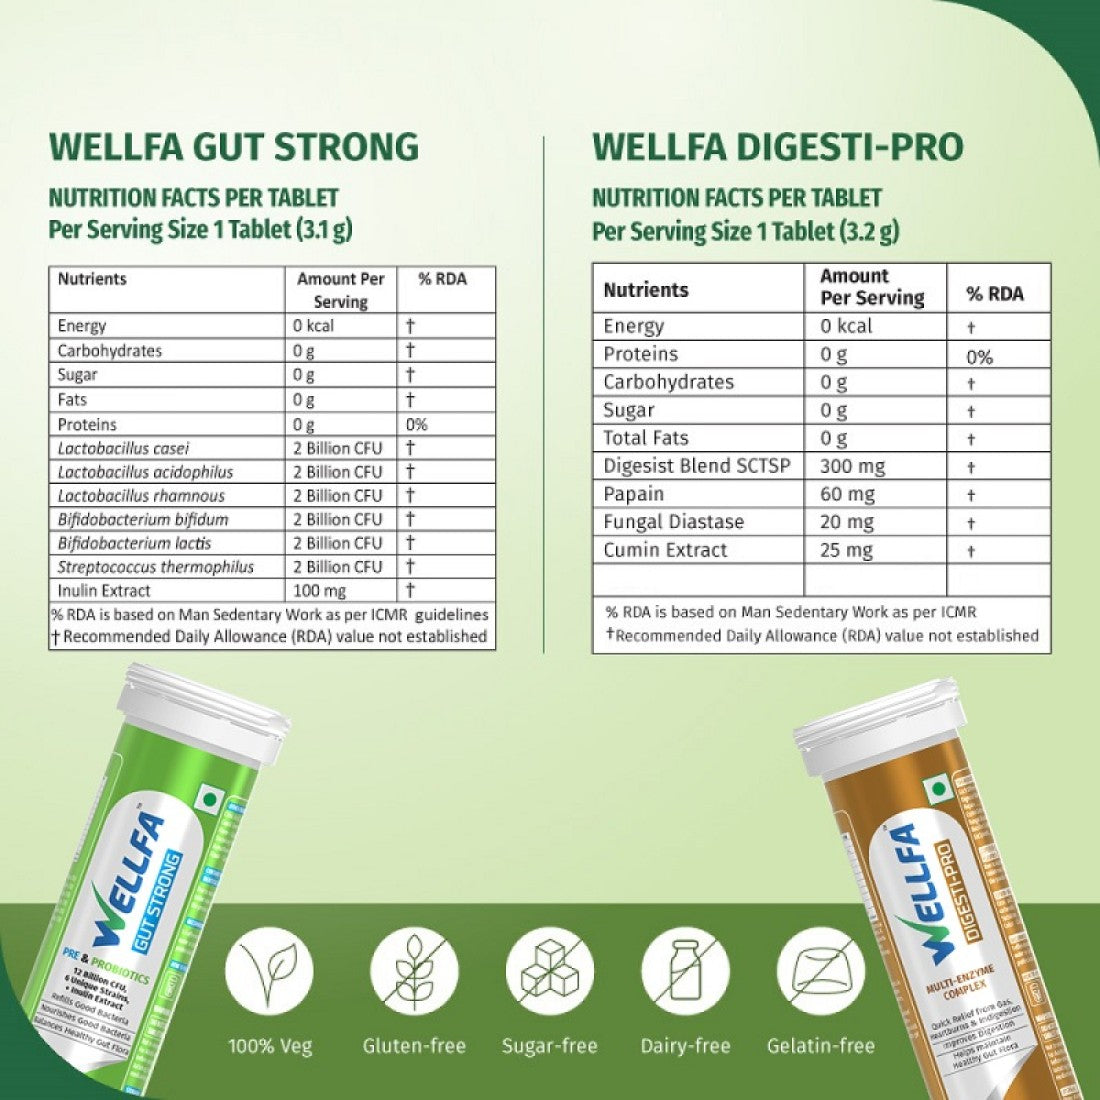 Wellfa Gut Strong & Digestive Pro Nutritional Facts Per Tablet